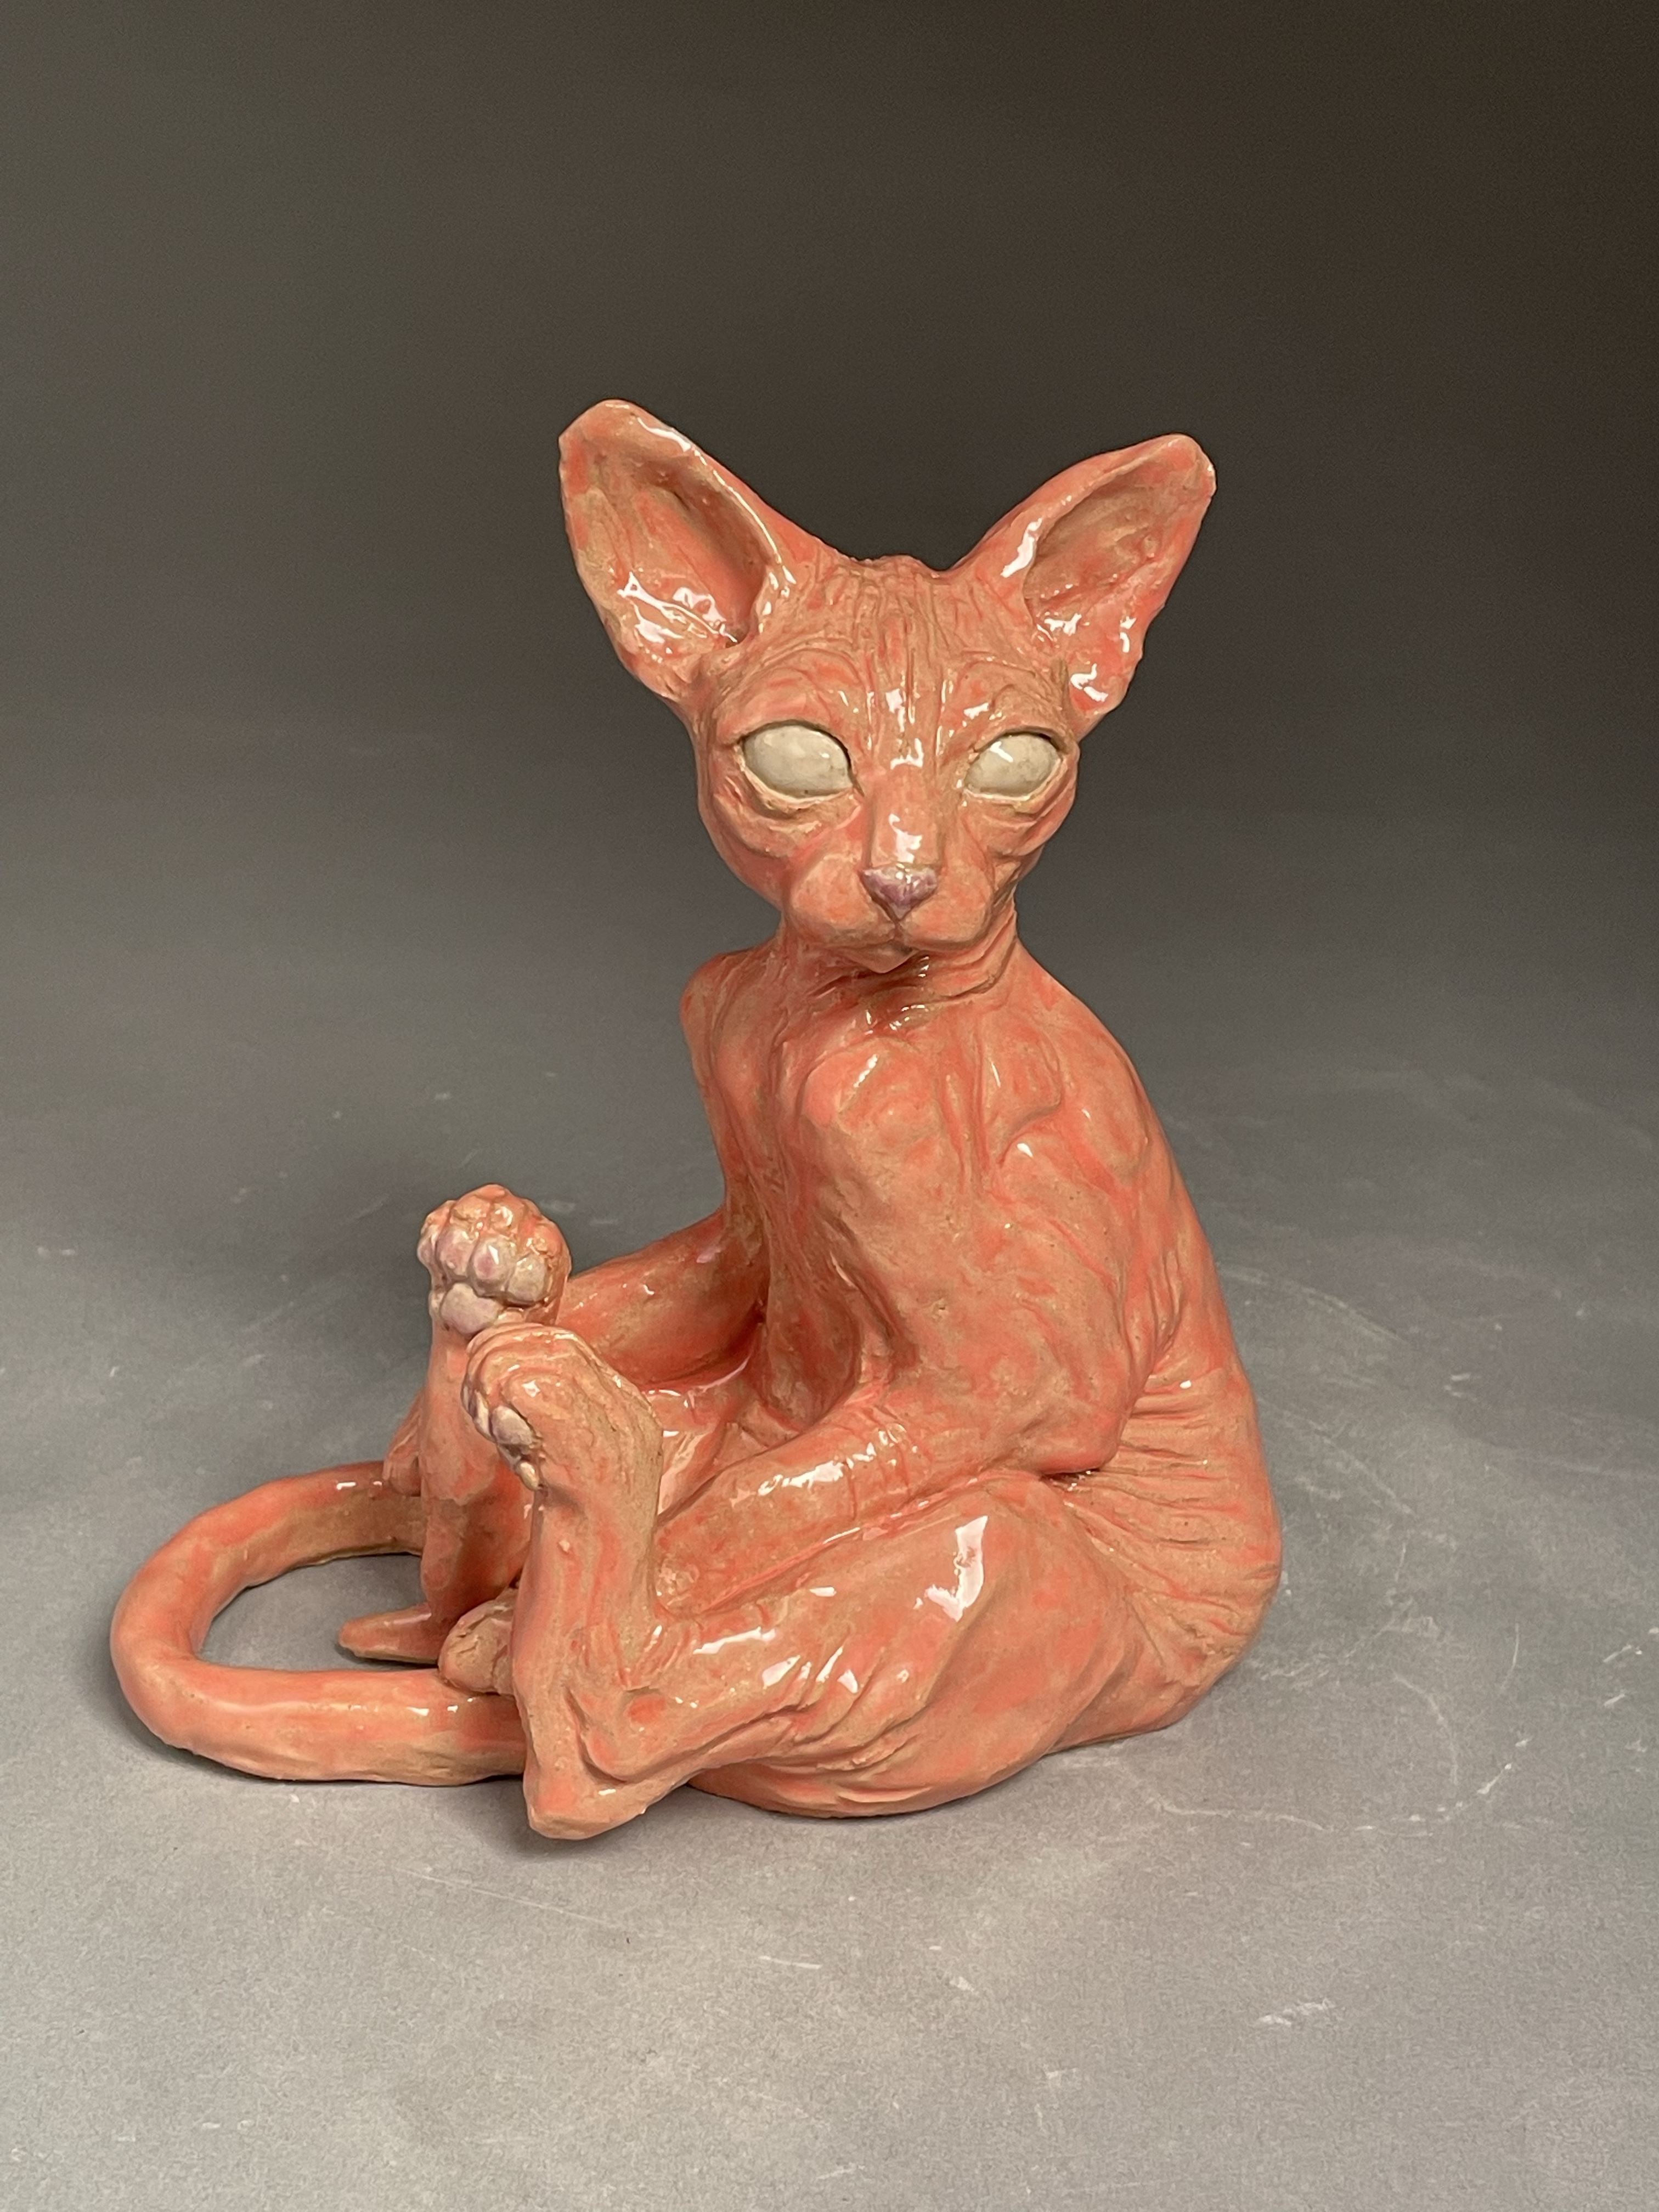 Ceramic hairless cat sitting on its back looking to the left with a pink glaze